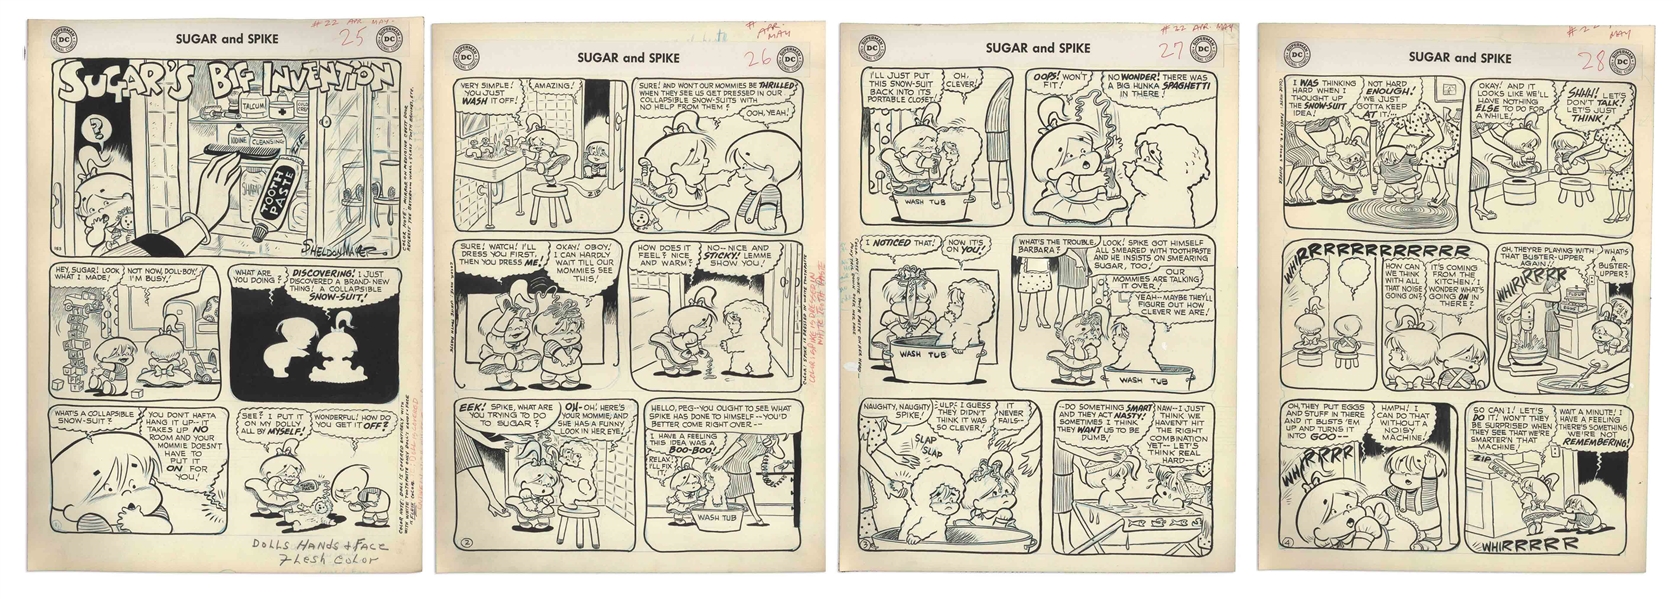 Sheldon Mayer Original Hand-Drawn ''Sugar and Spike'' Comic Book -- Complete Issue of 28 Pages From the April-May 1959 Issue #22 -- An Appearance by Arthur, and a Visit to Dad's Office